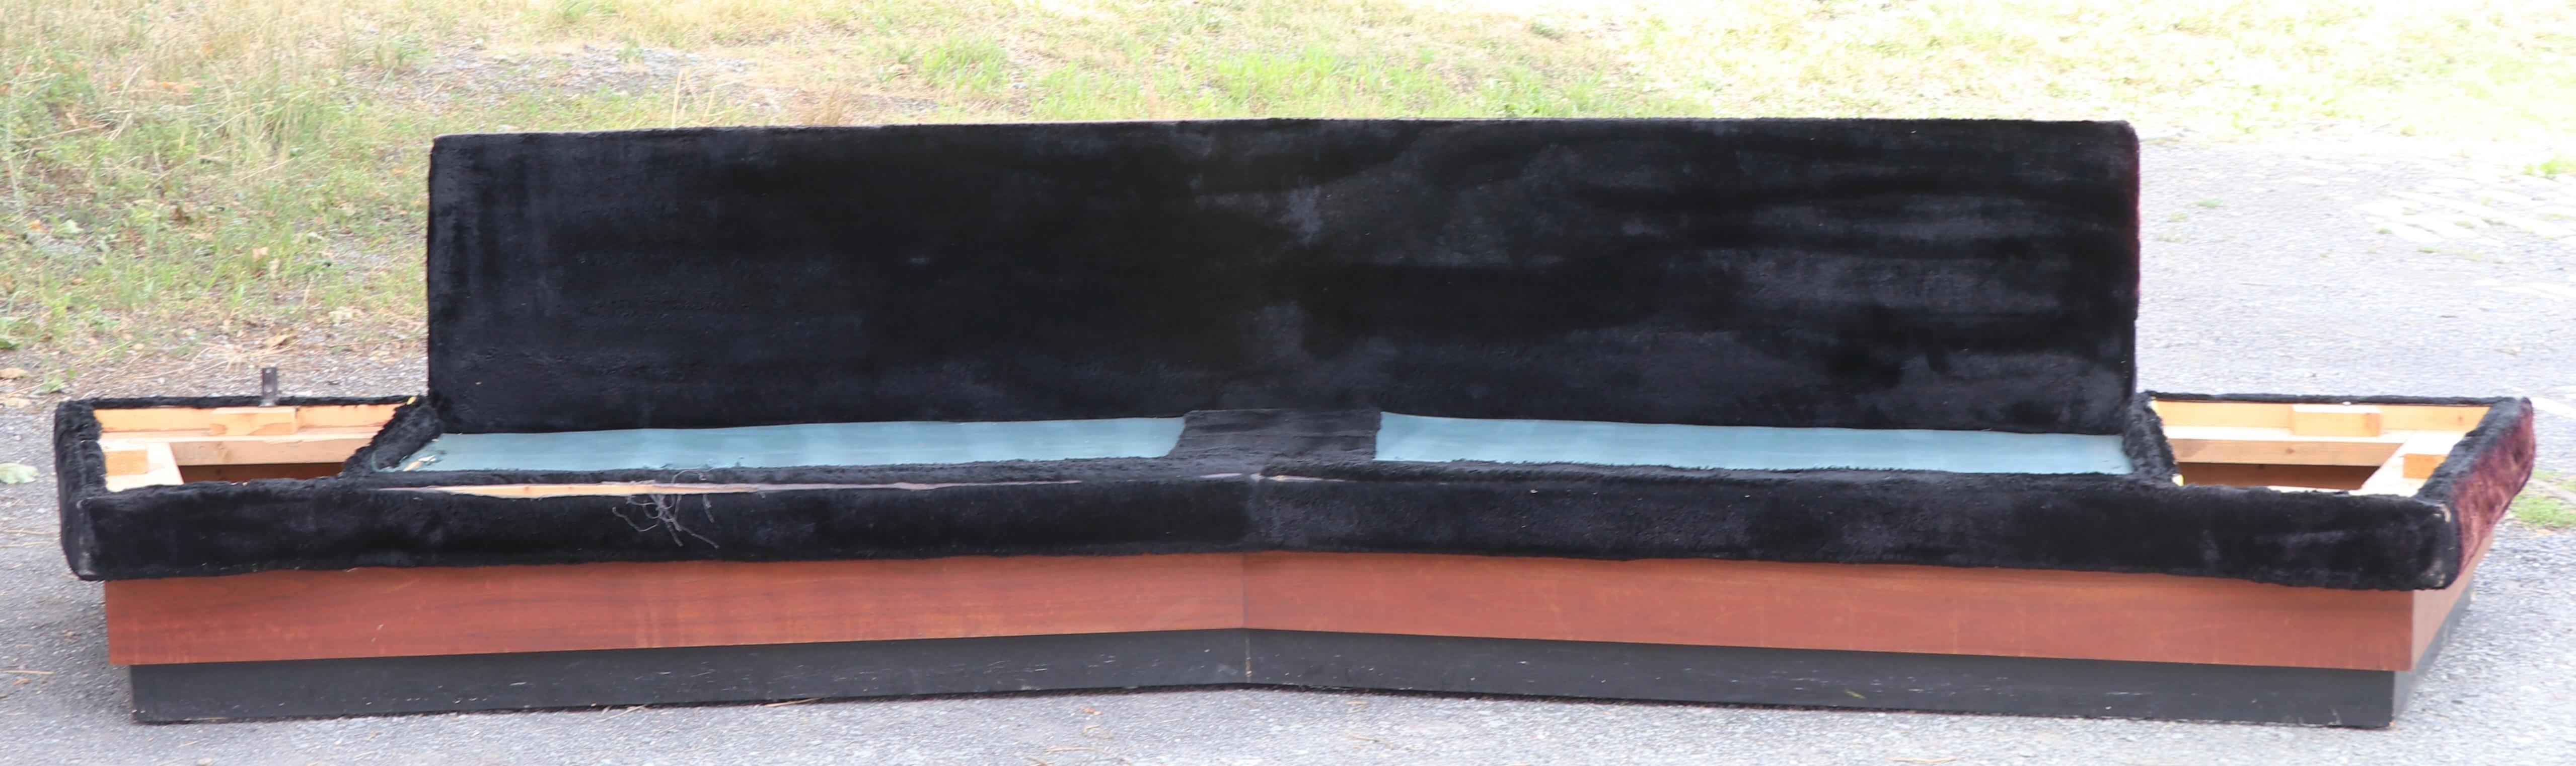 Massive boomerang shaped sofa, and matching coffee table designed by Adrian Pearsall, for Craft associates. The set is being offered as is, and as found, it will obviously need restoration,mbut is structurally sound and restorable. The coffee table